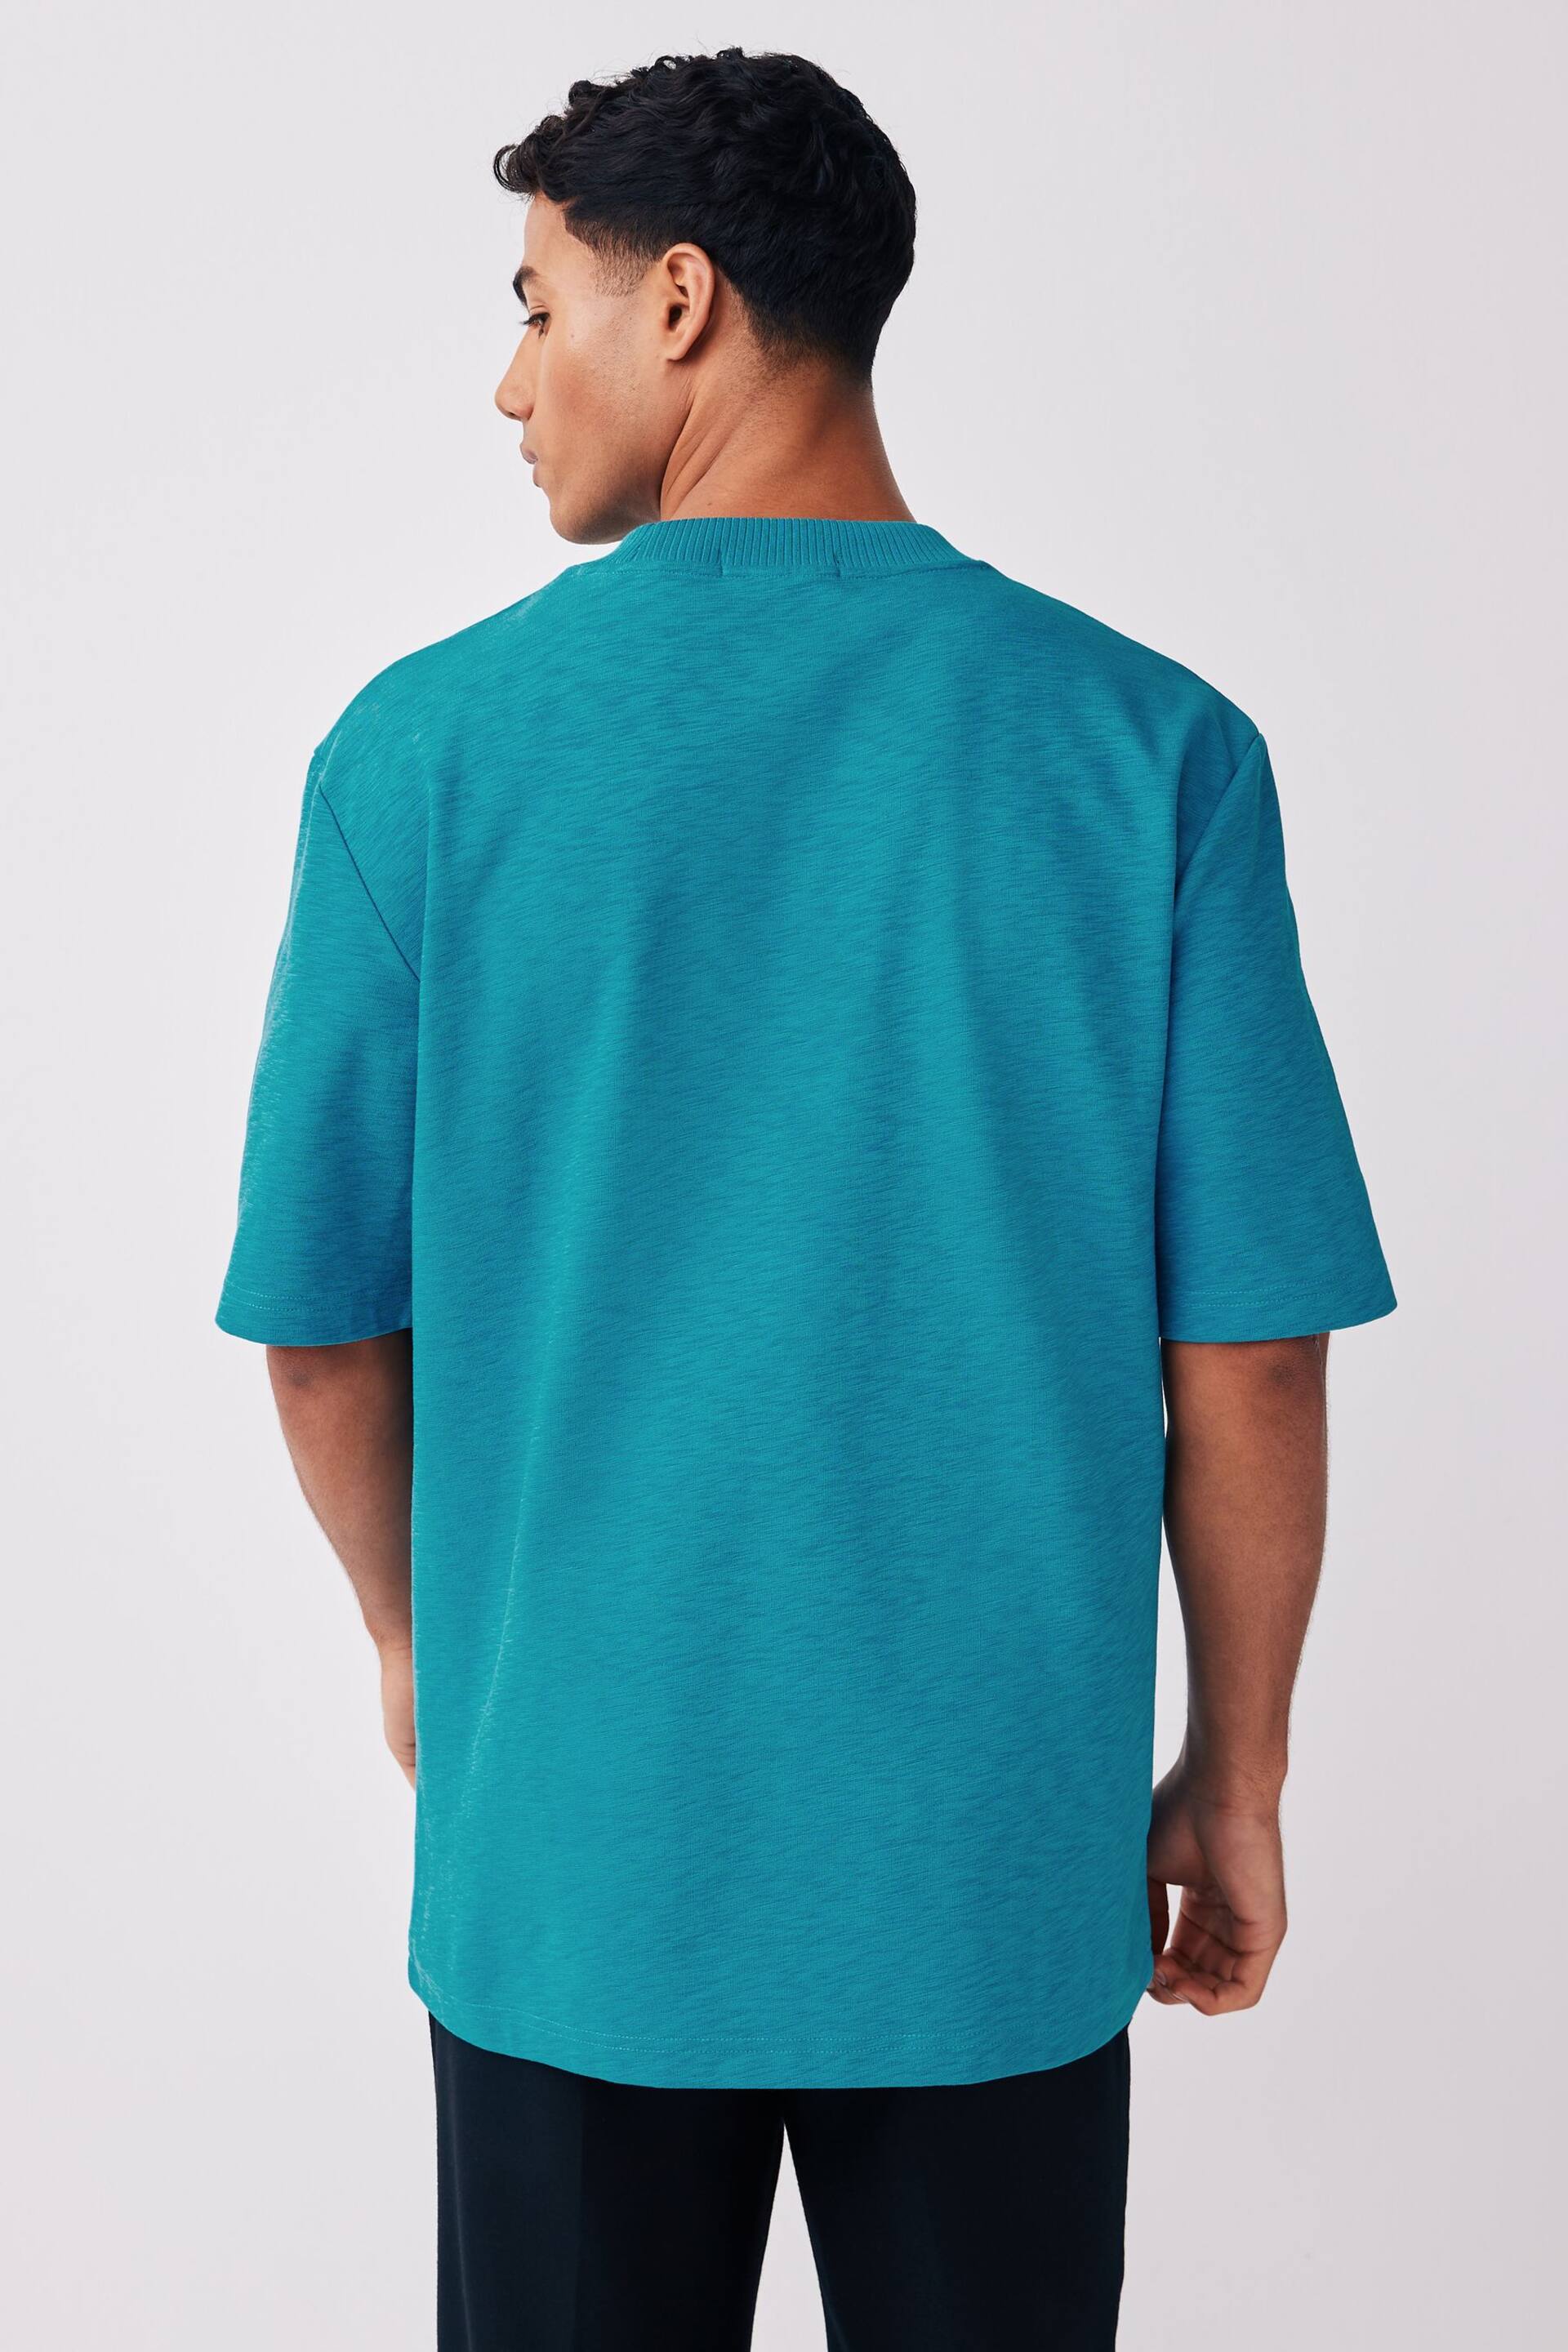 Fred Perry Relaxed Fit Slub Textured T-Shirt - Image 4 of 4